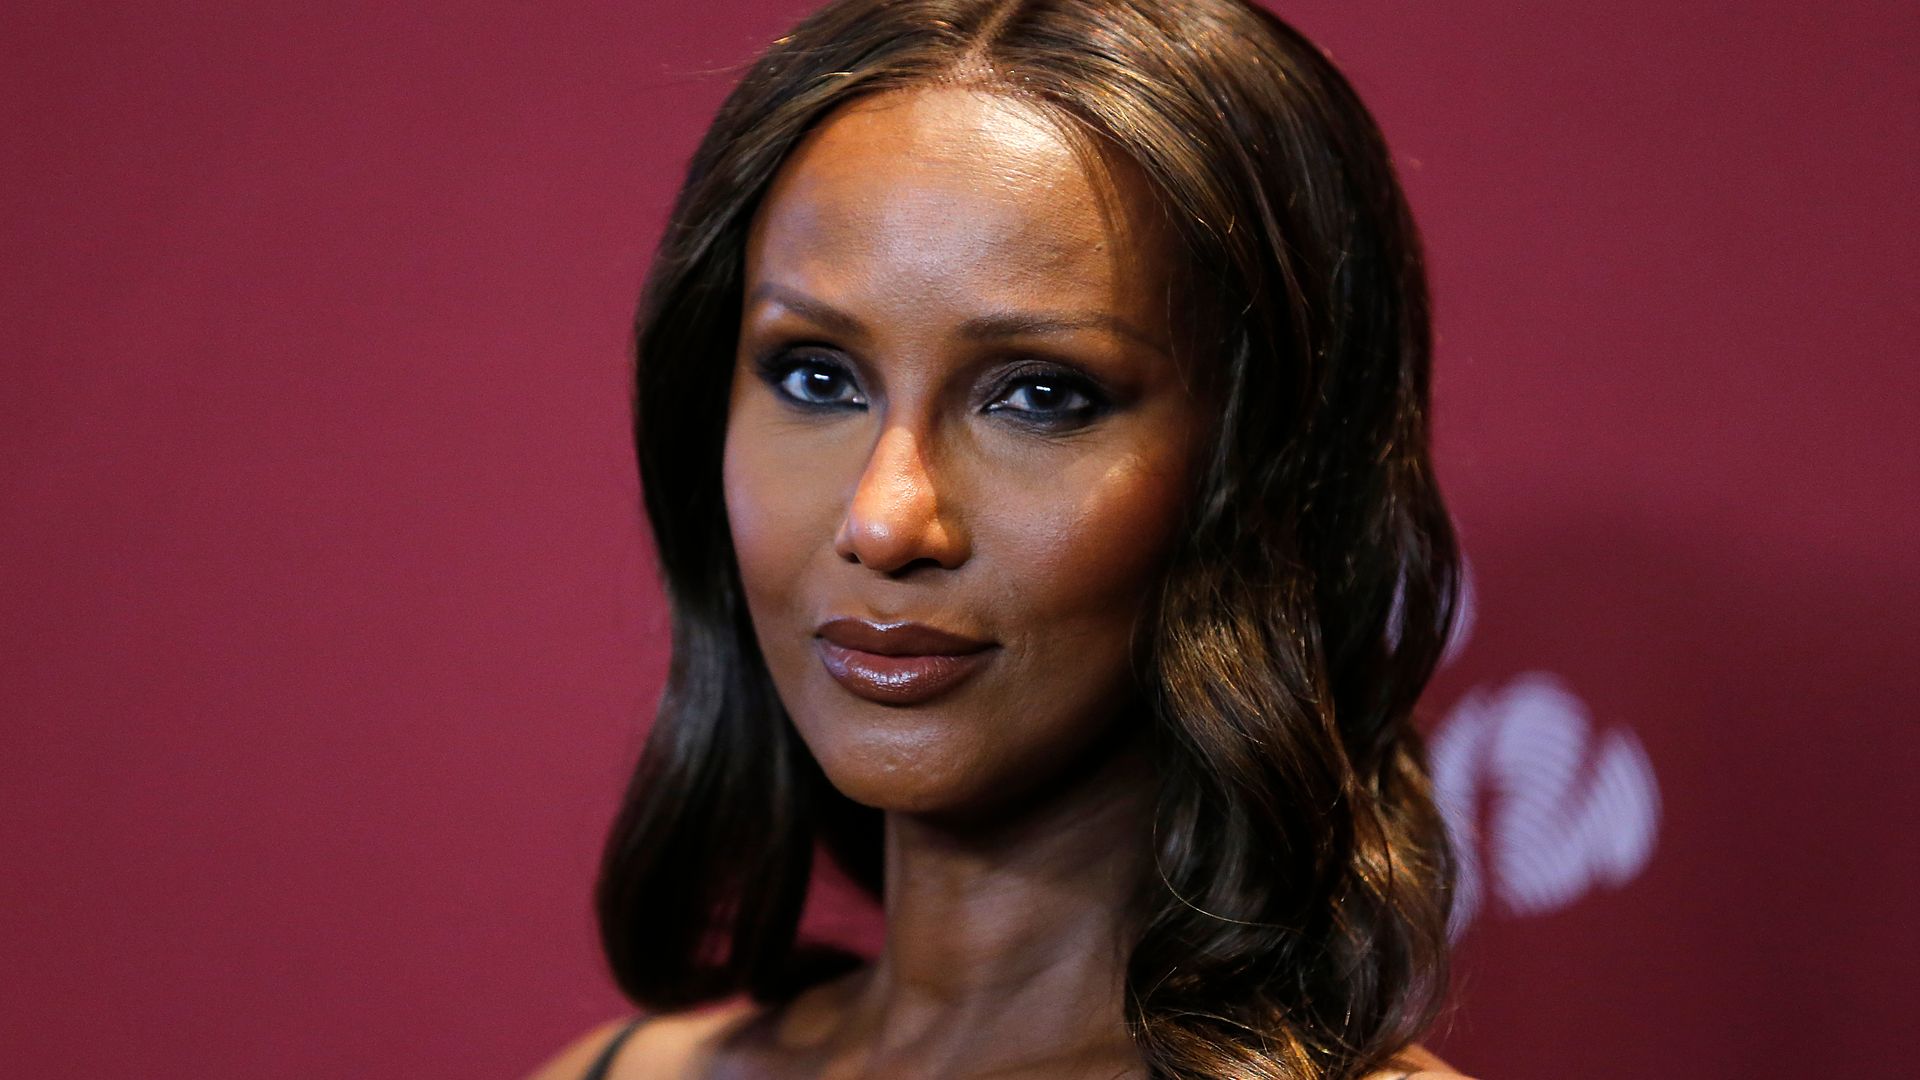 David Bowie's wife Iman, 67, shows off model figure in waist-cinching gown